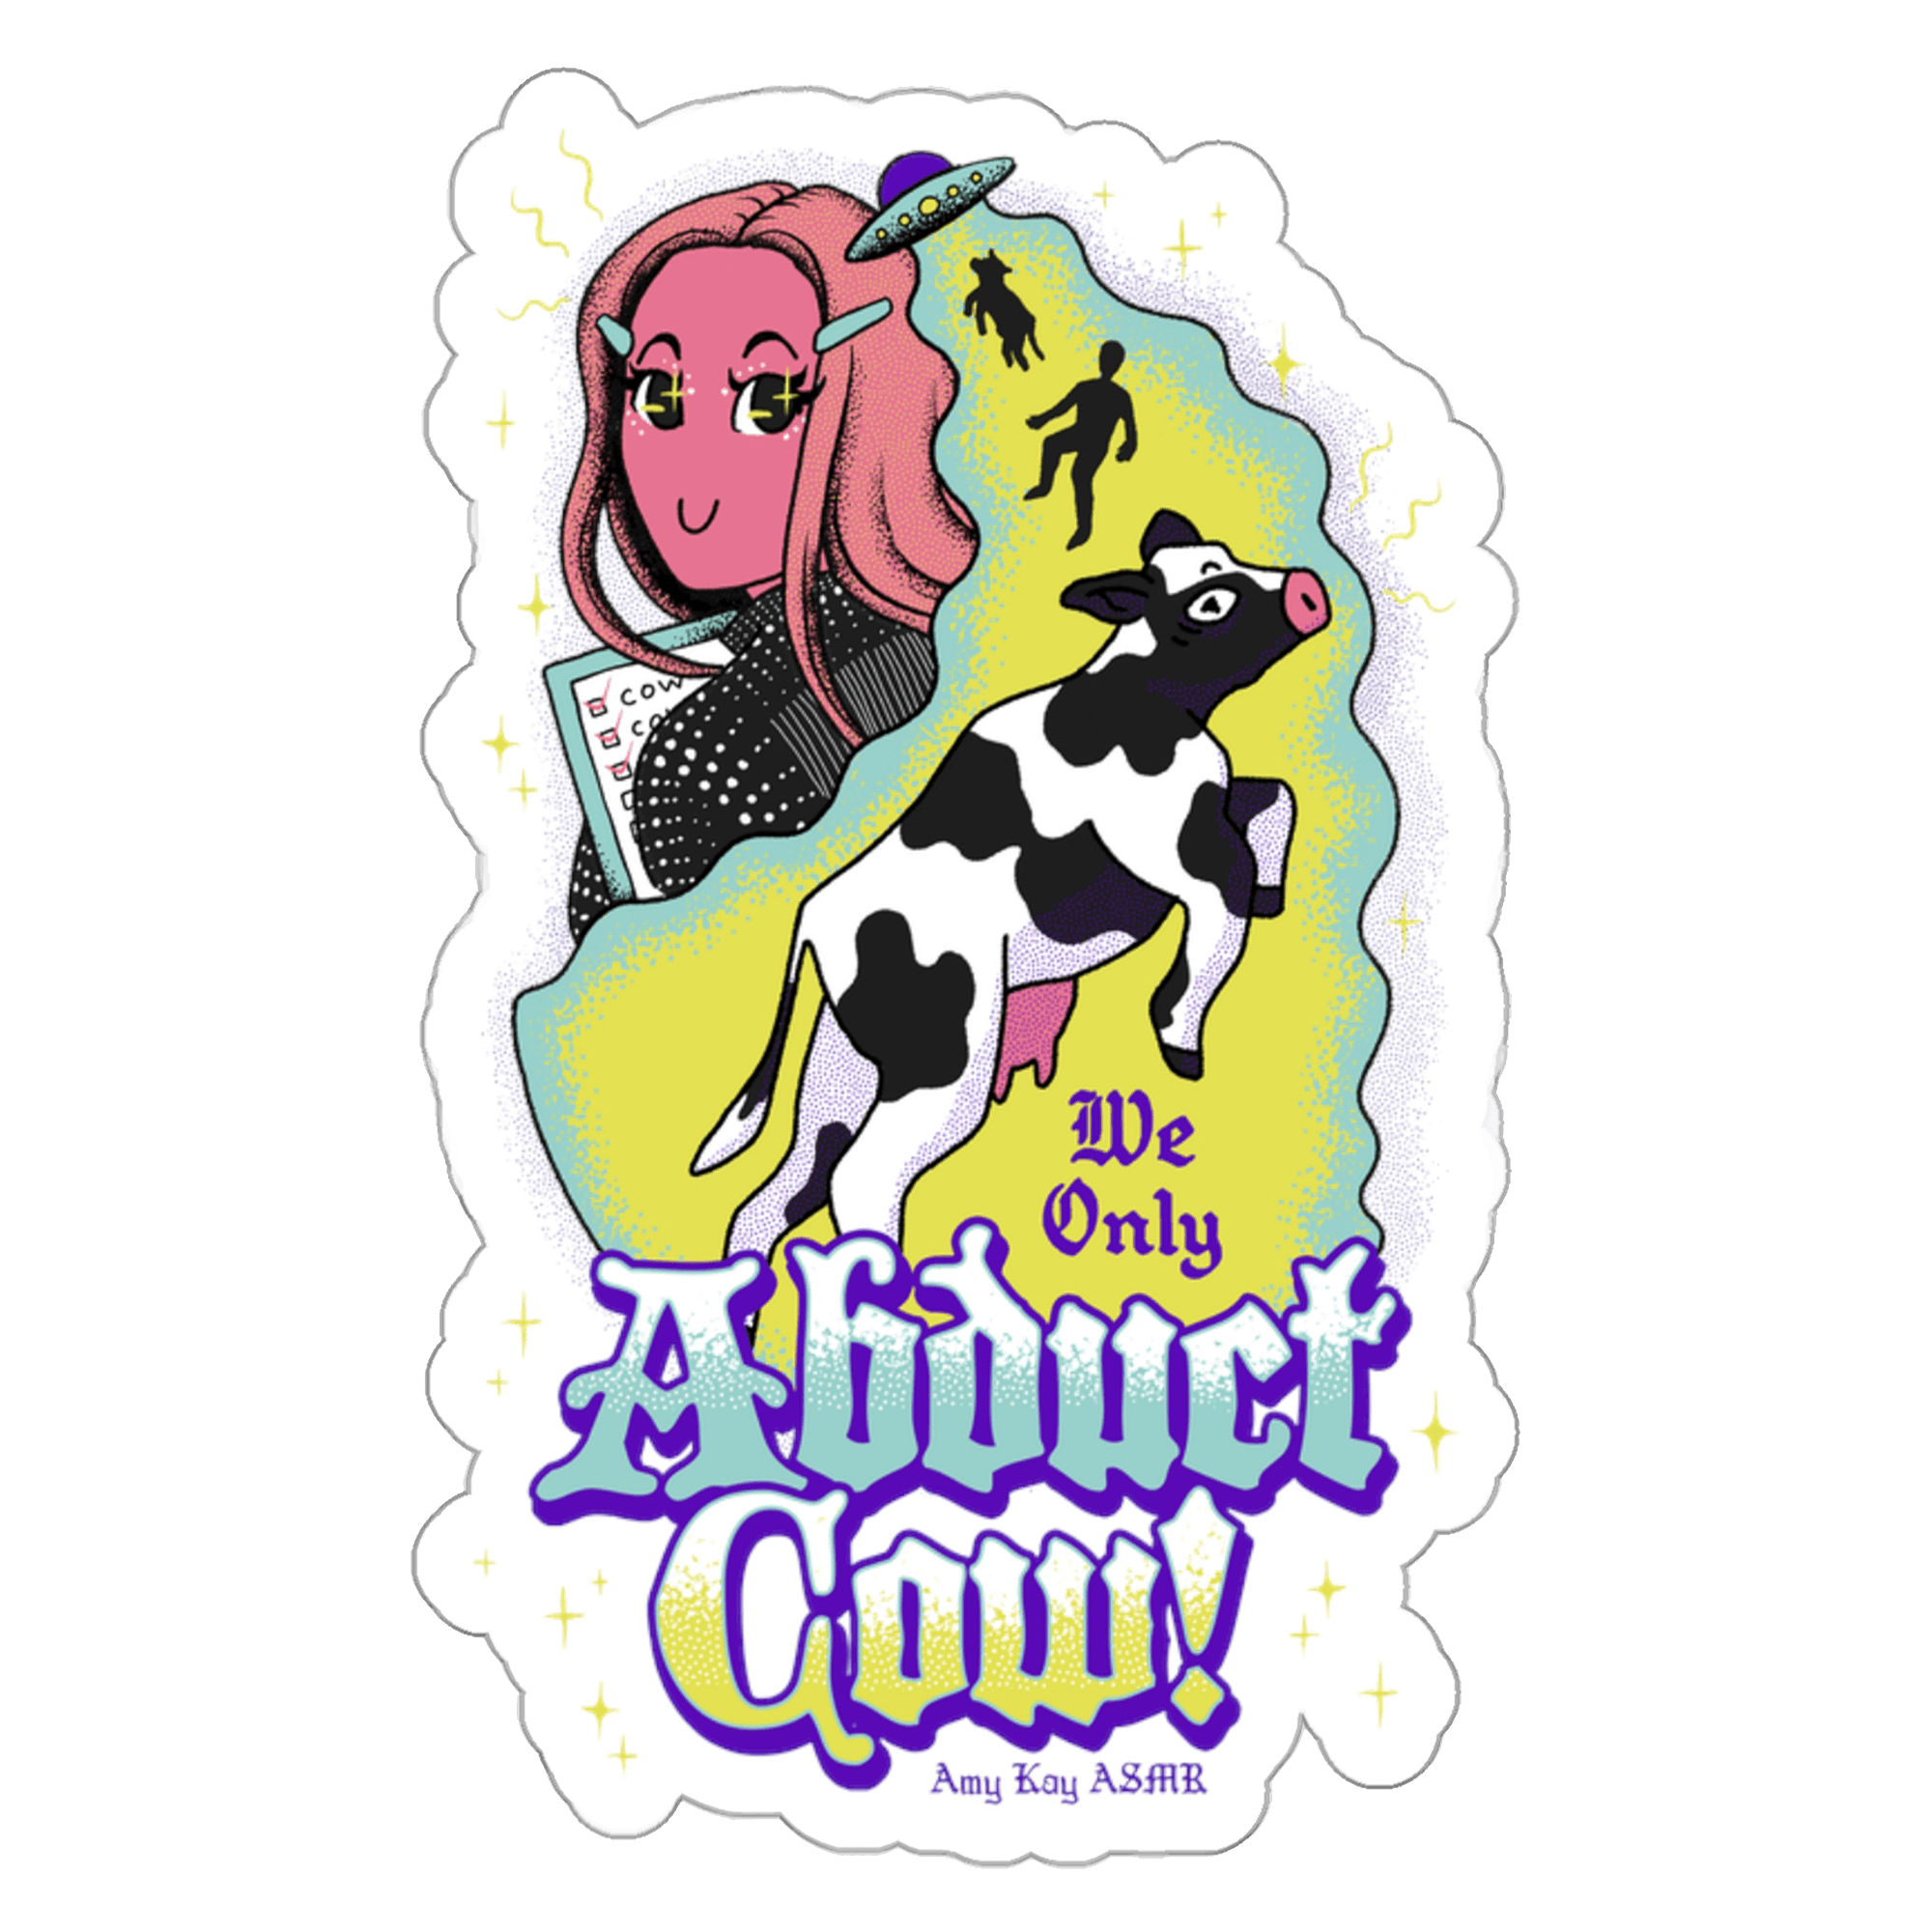 We Only Abduct Cow Sticker - Amy Kay ASMR